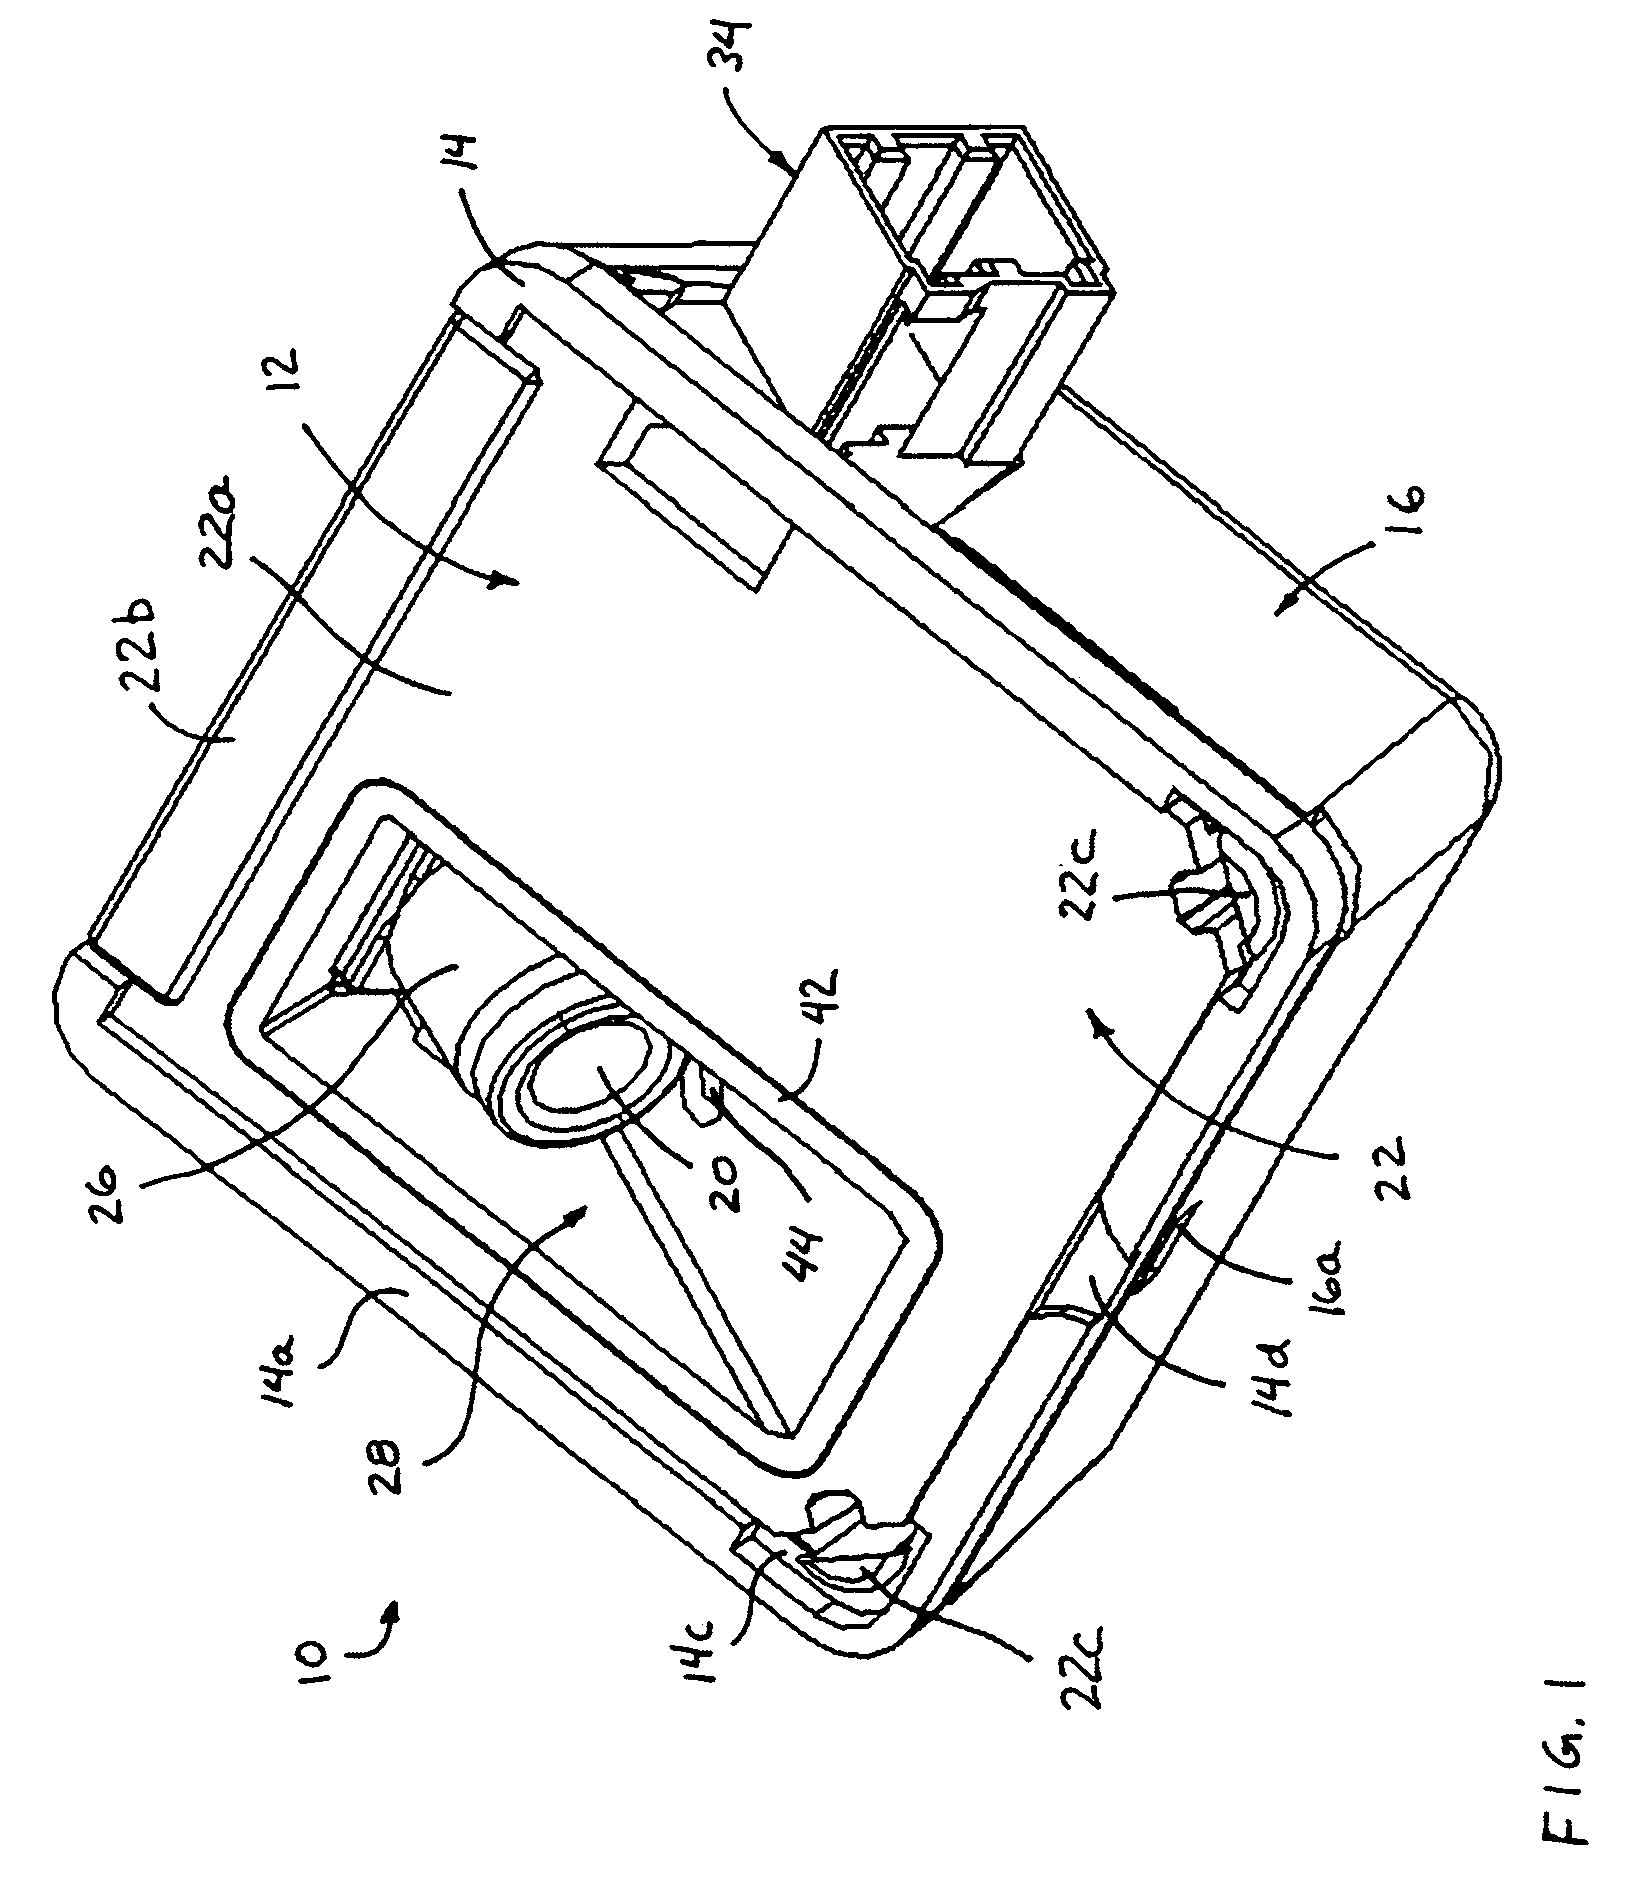 Accessory module for vehicle